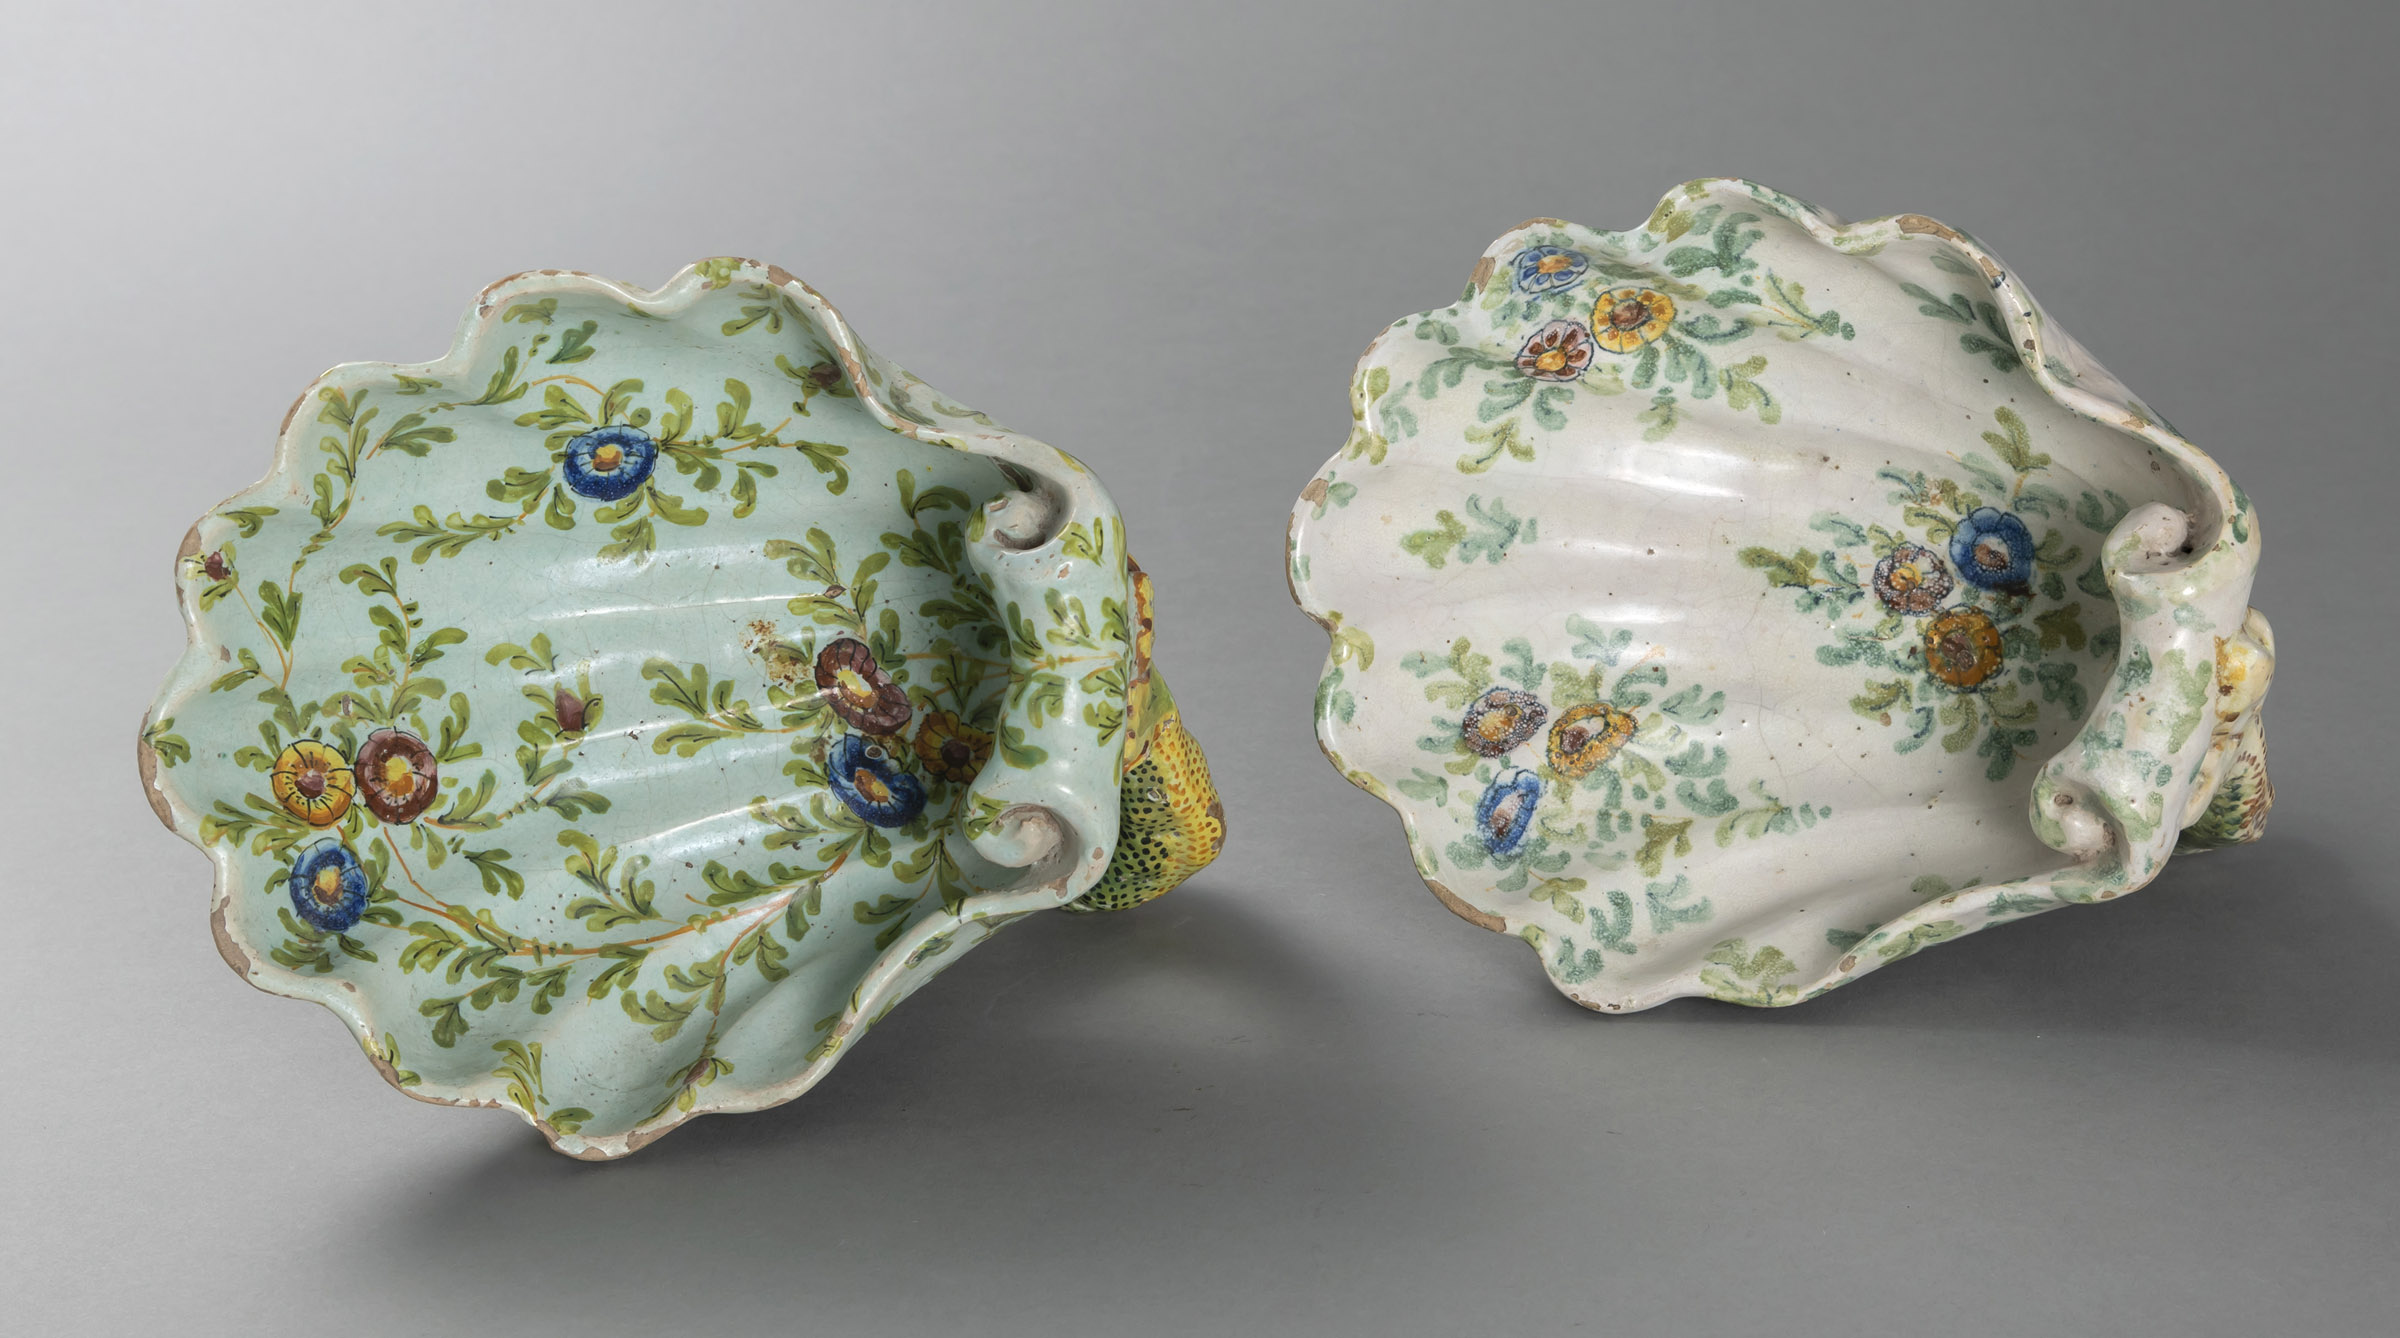 A PAIR OF SHELL SHAPED FOOTED BOWLS WITH DOLPHIN FEET - Image 3 of 4